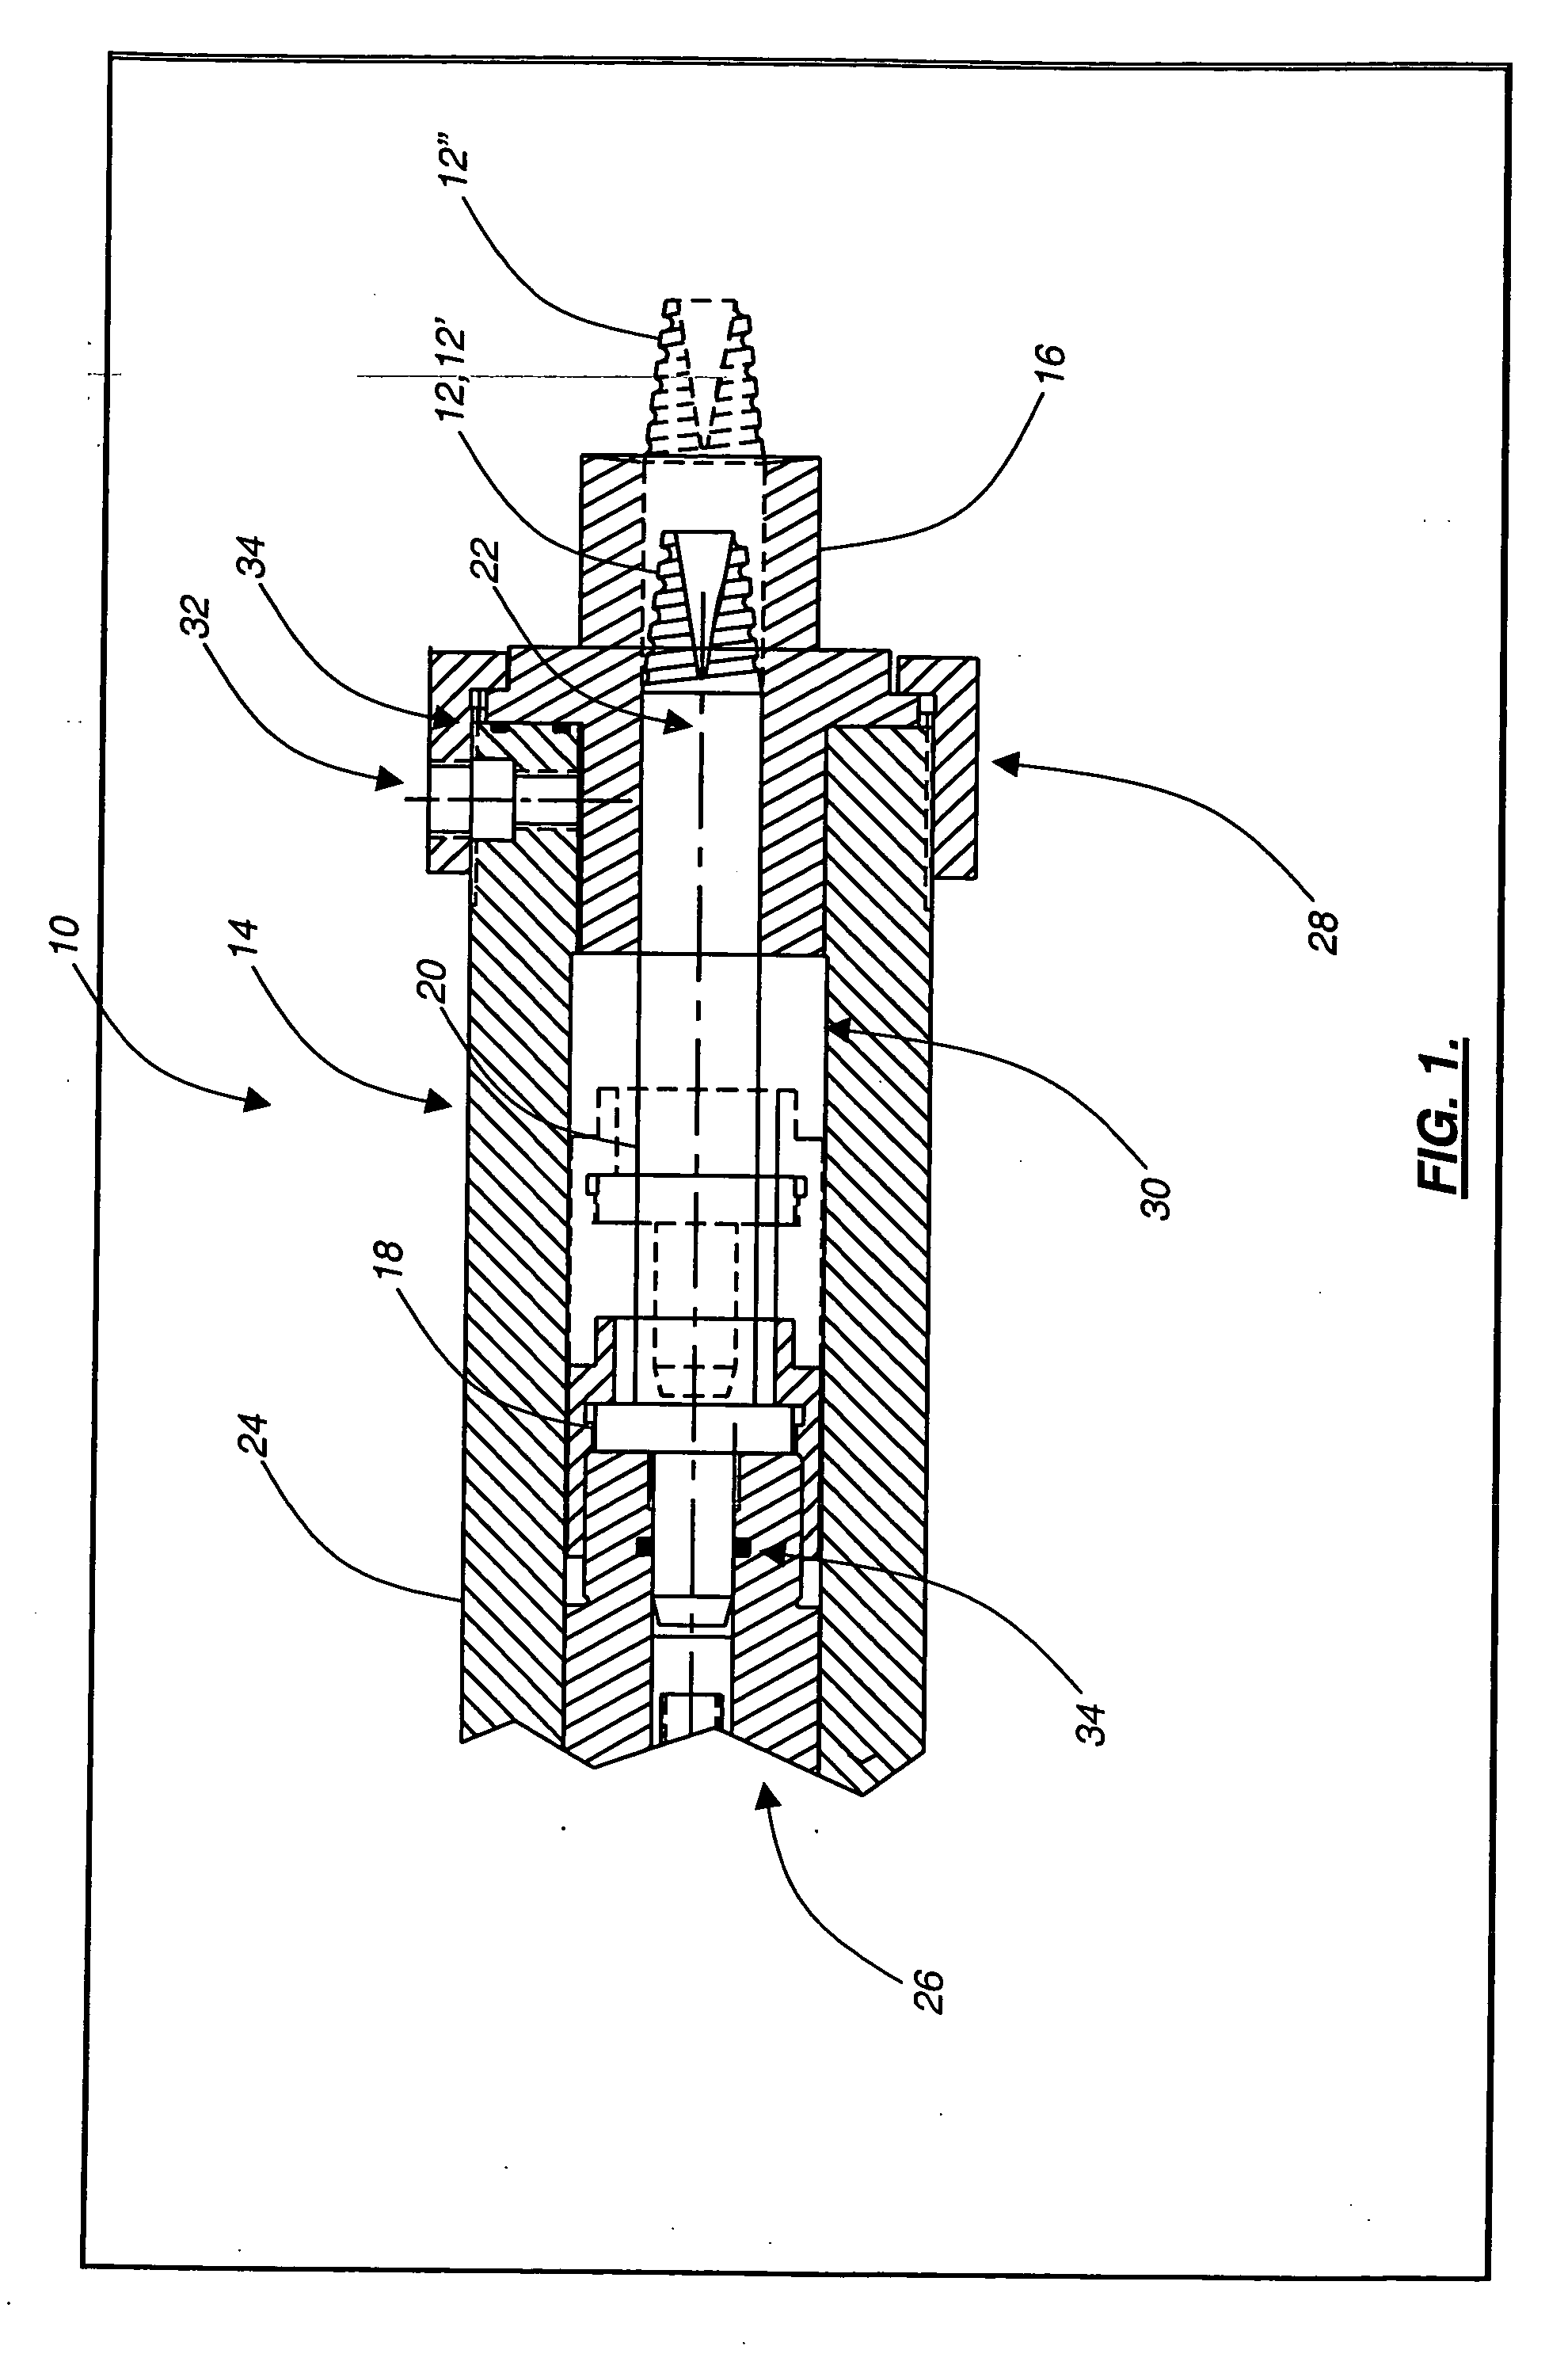 Apparatus and method for friction stir welding using a consumable pin tool